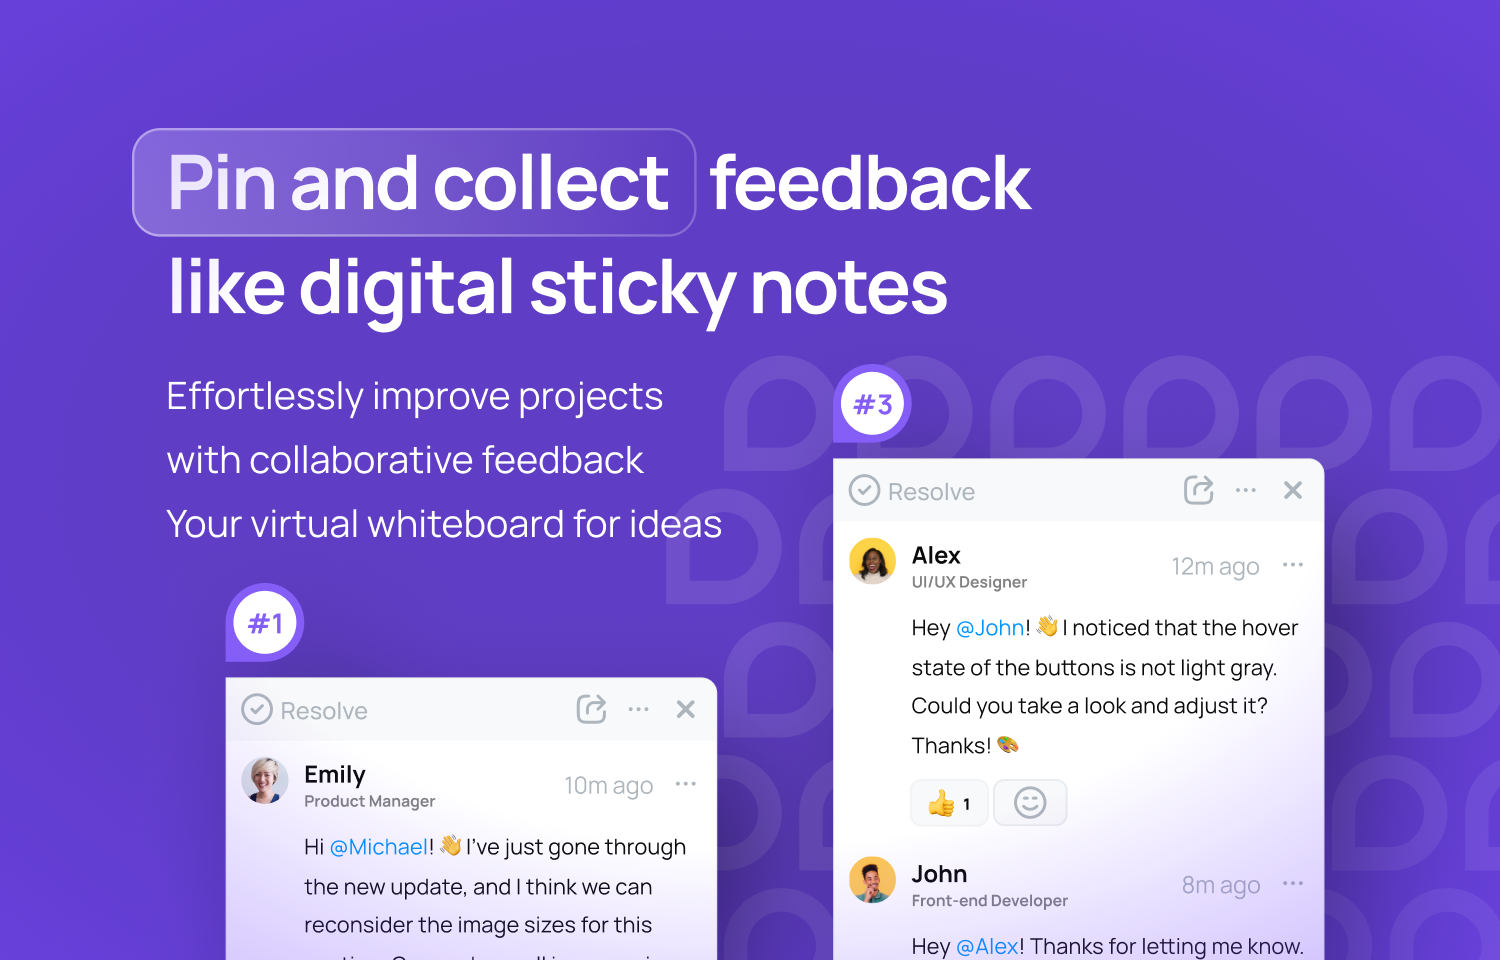 Commented UI showing you can collect feedback